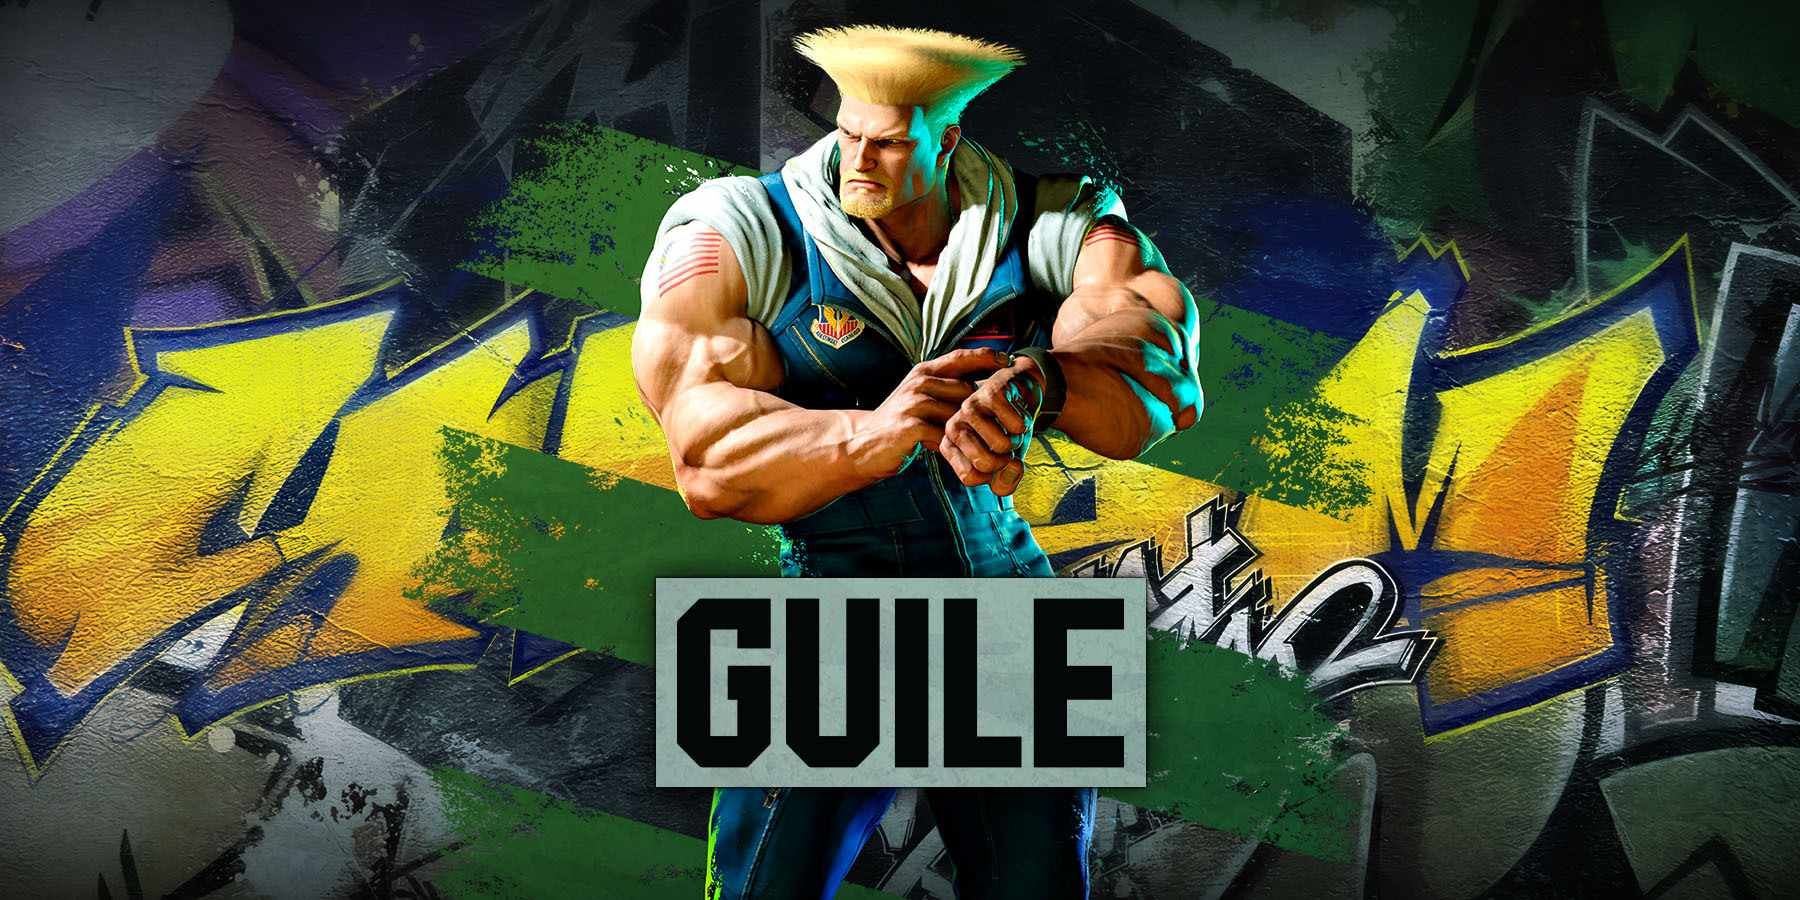 SF6 Guile Combos On Hitbox / Leverless Tips And Tricks (with